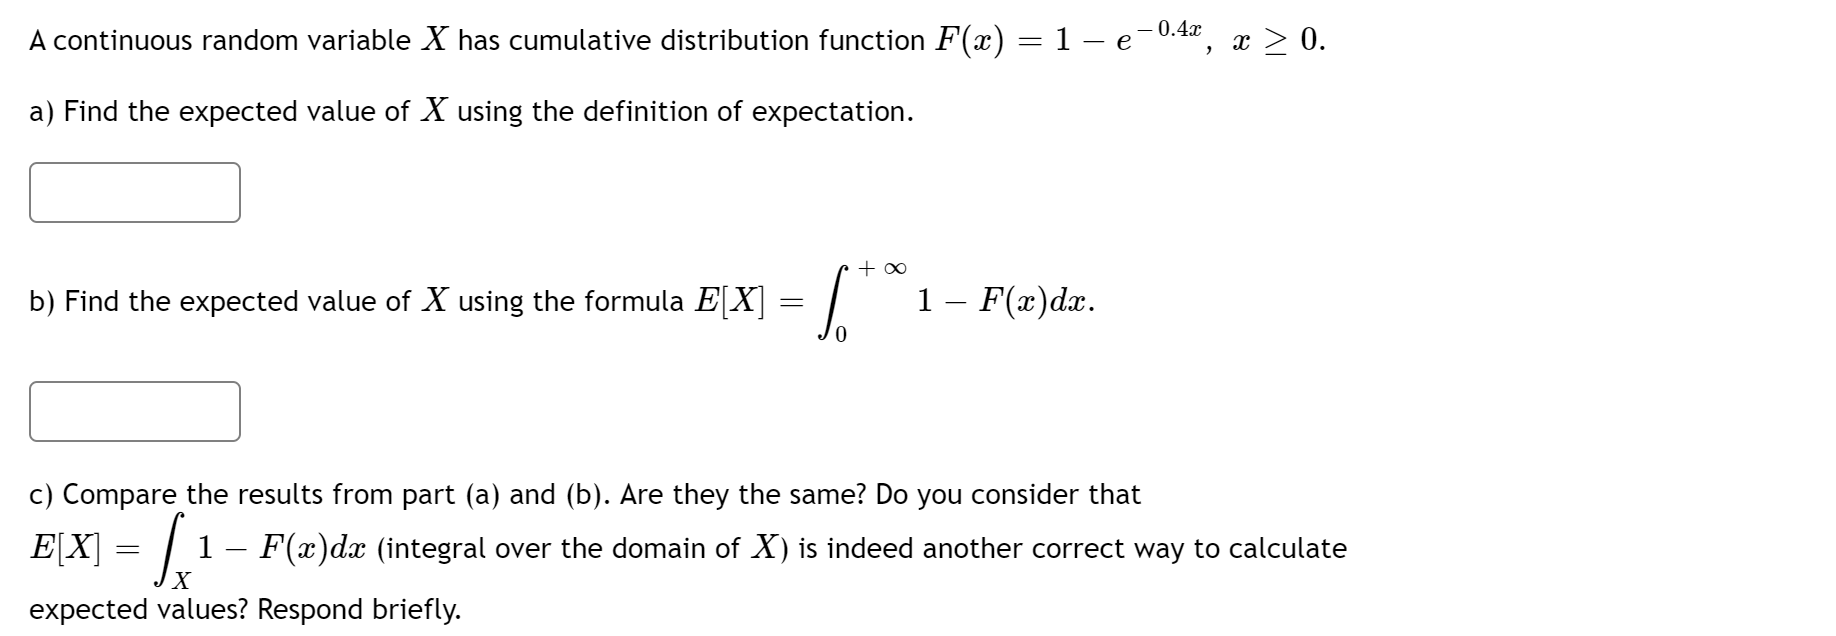 – 0.4x
A continuous random variable X has cumulative distribution function F(x) = 1 – e-0.42, x > 0.
a) Find the expected value of X using the definition of expectation.
